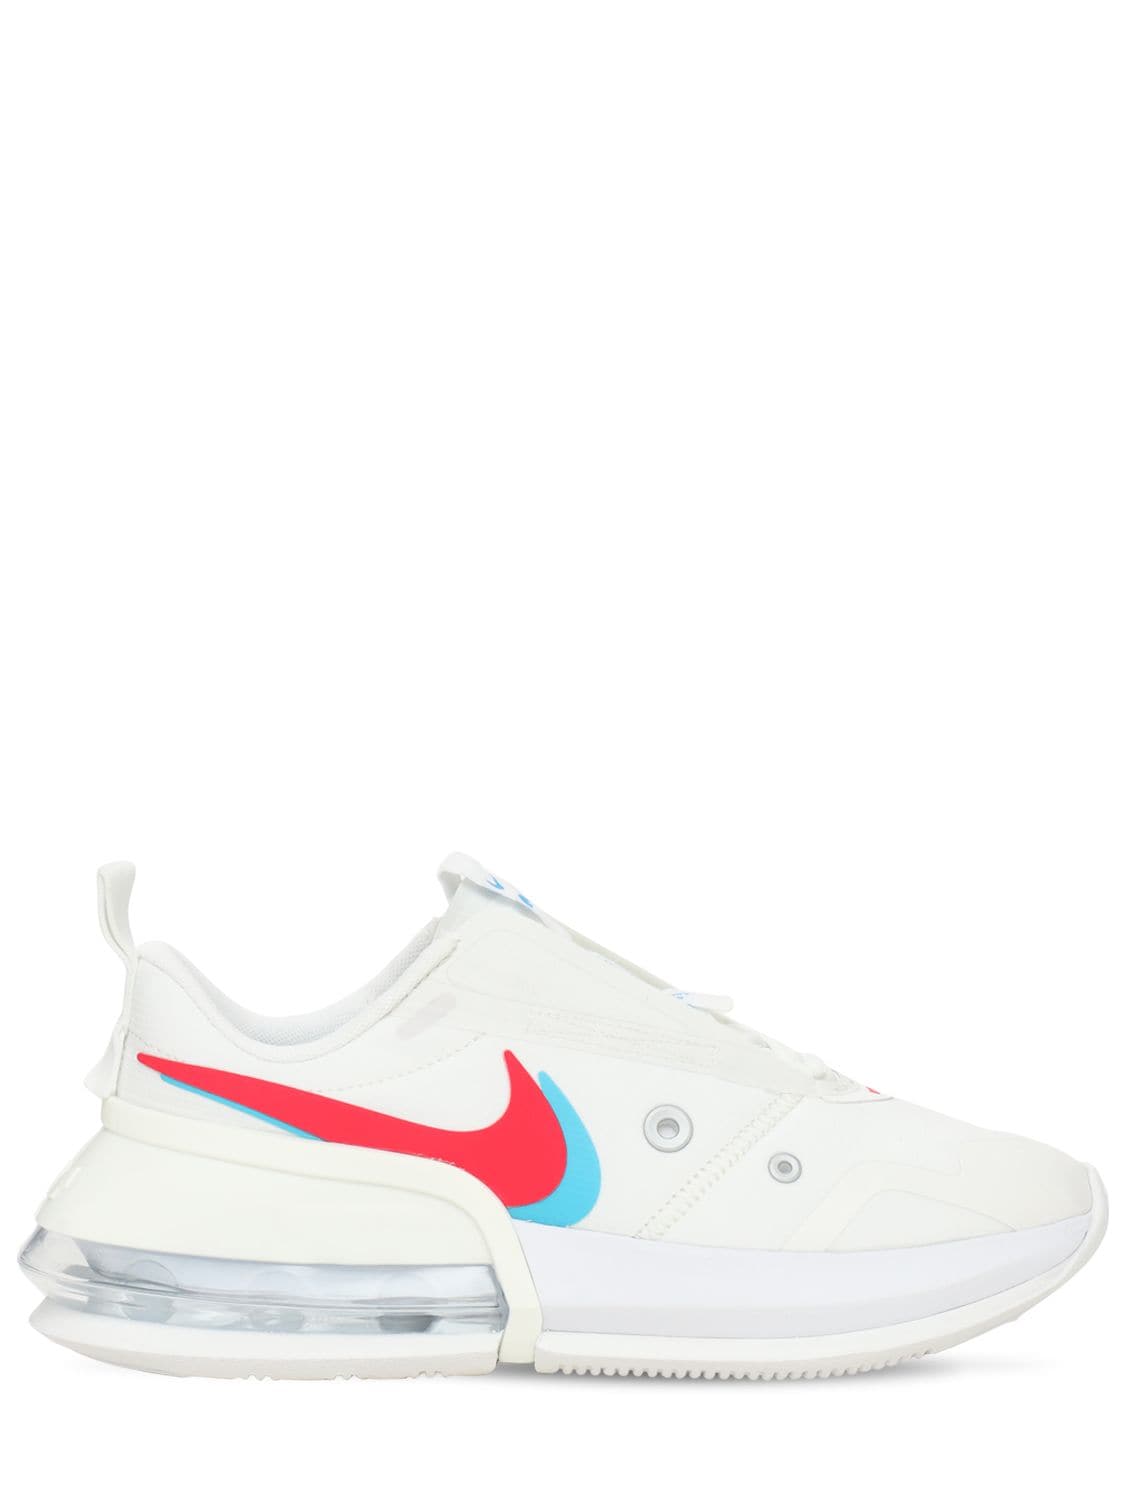 NIKE AIR MAX UP trainers,73IDL1016-MTAW0